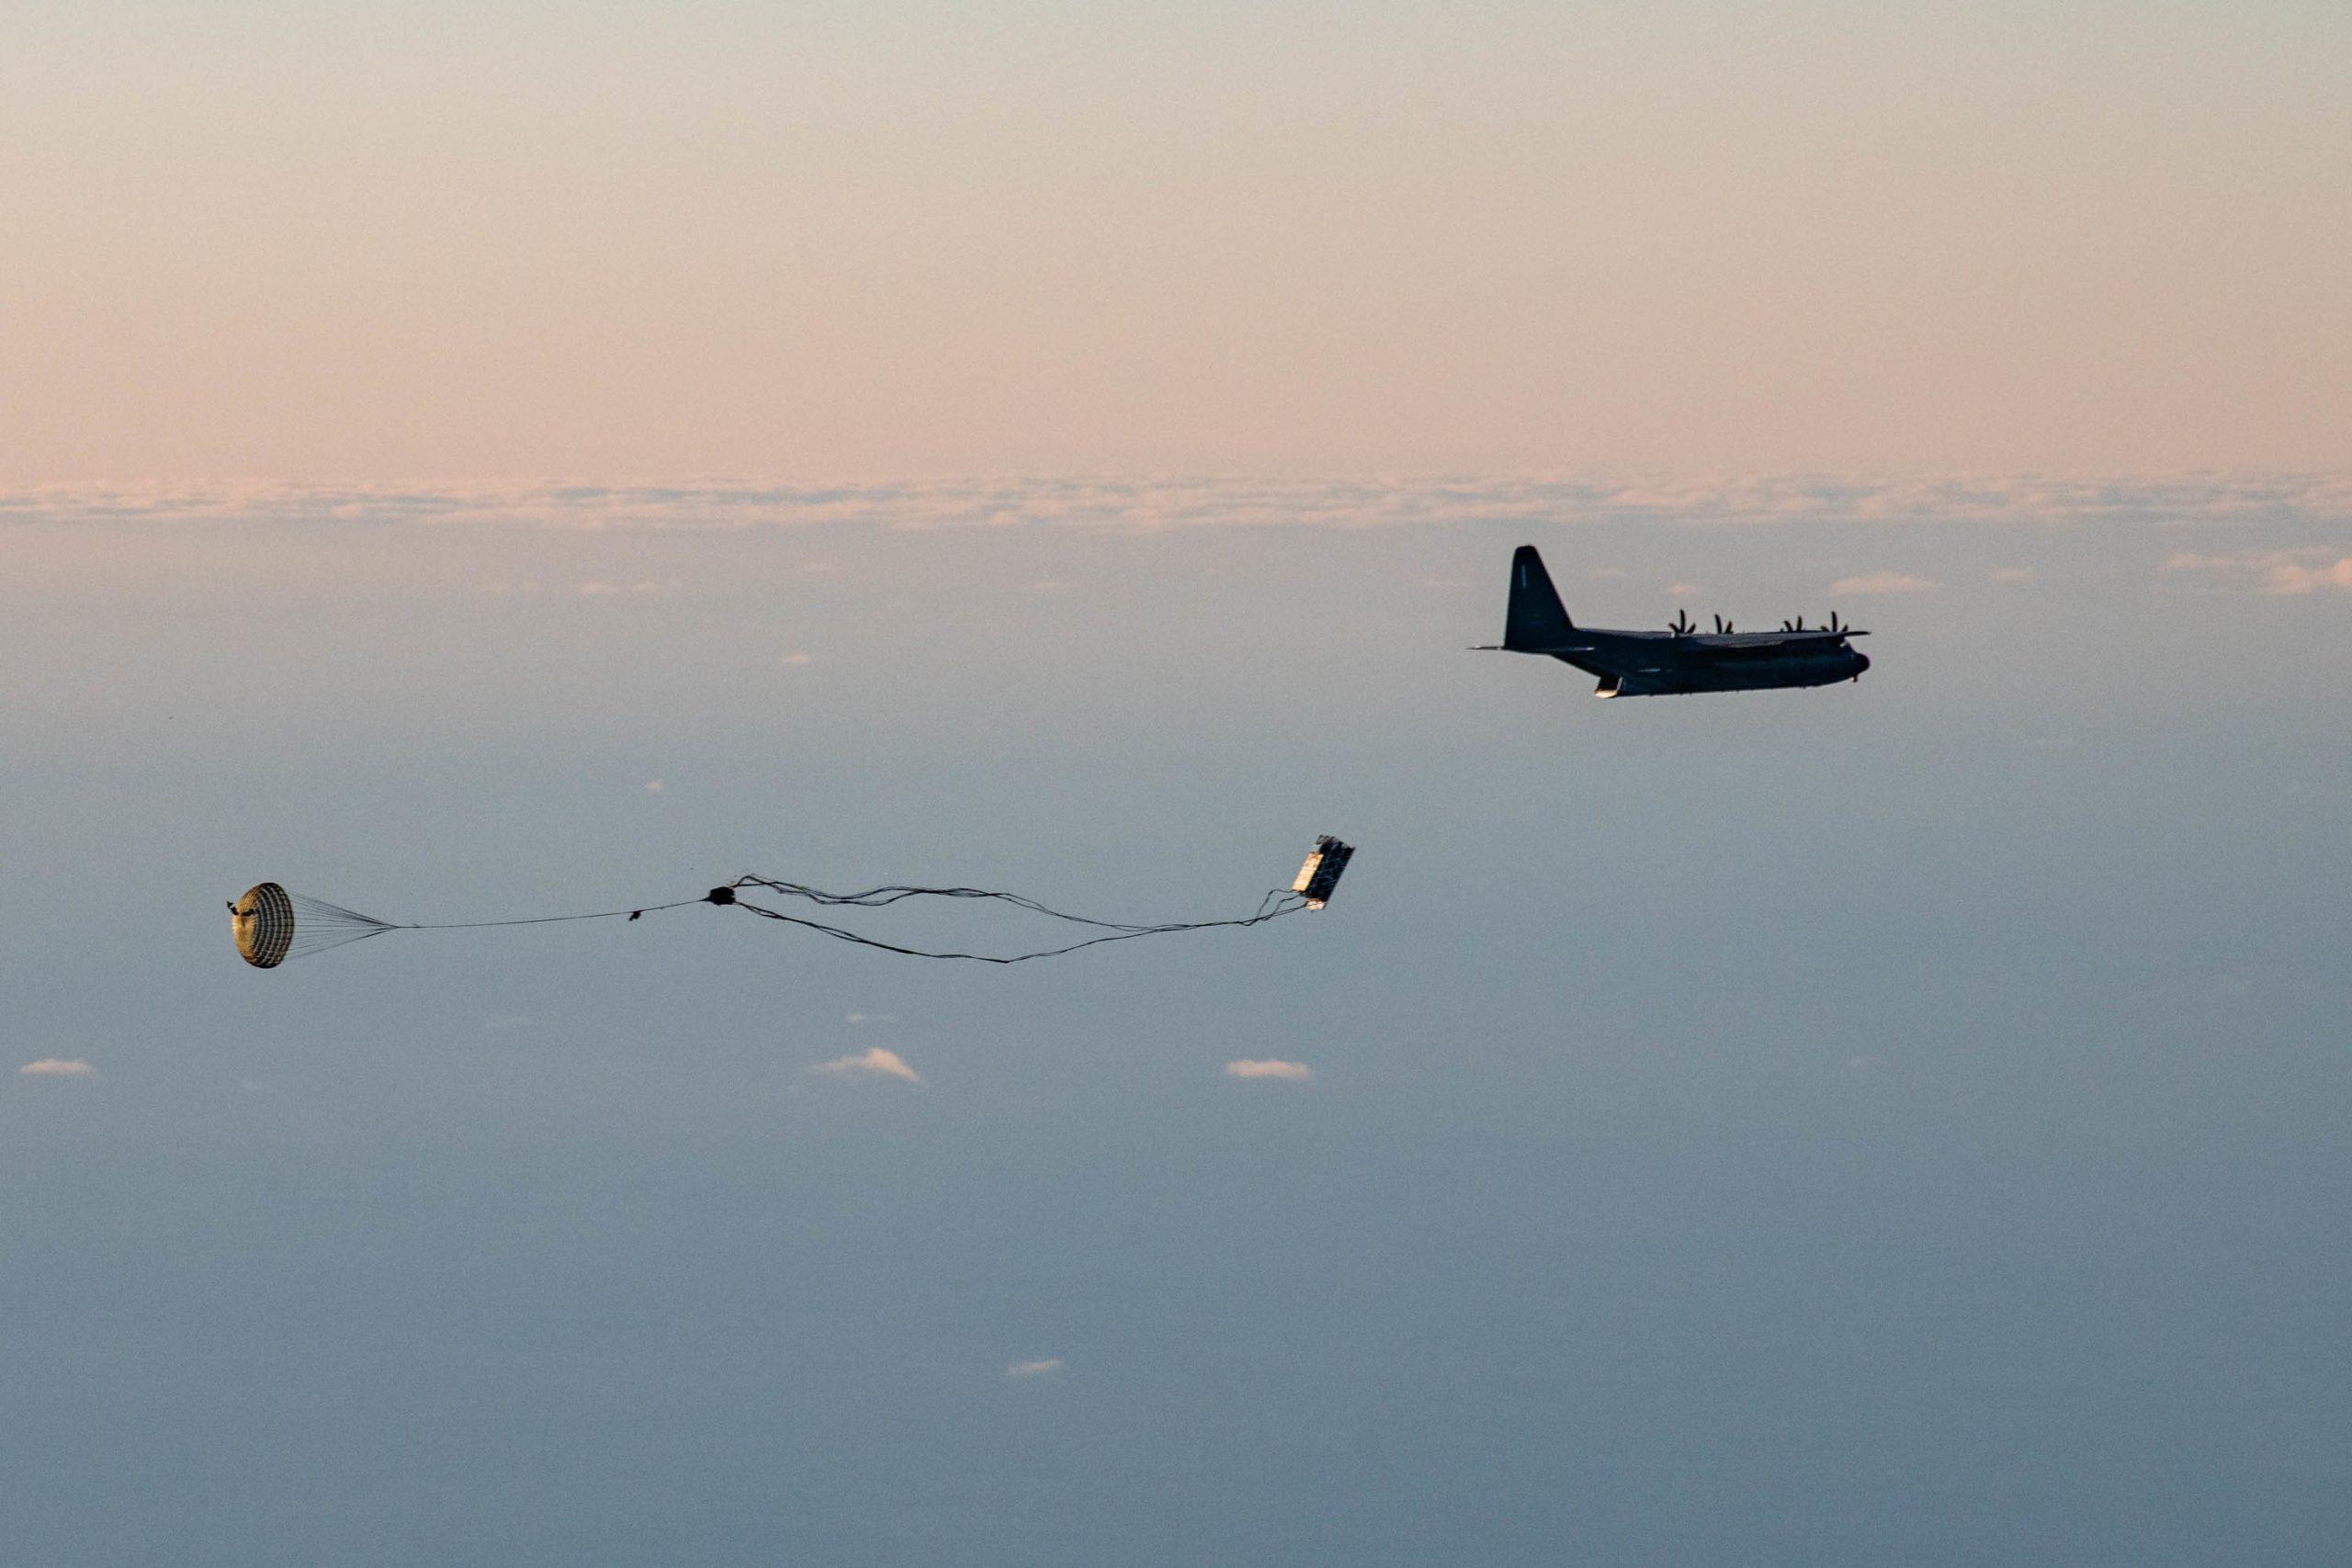 U.S. Air Force SDPE’s Rapid Dragon Capability Demonstrated in Norway